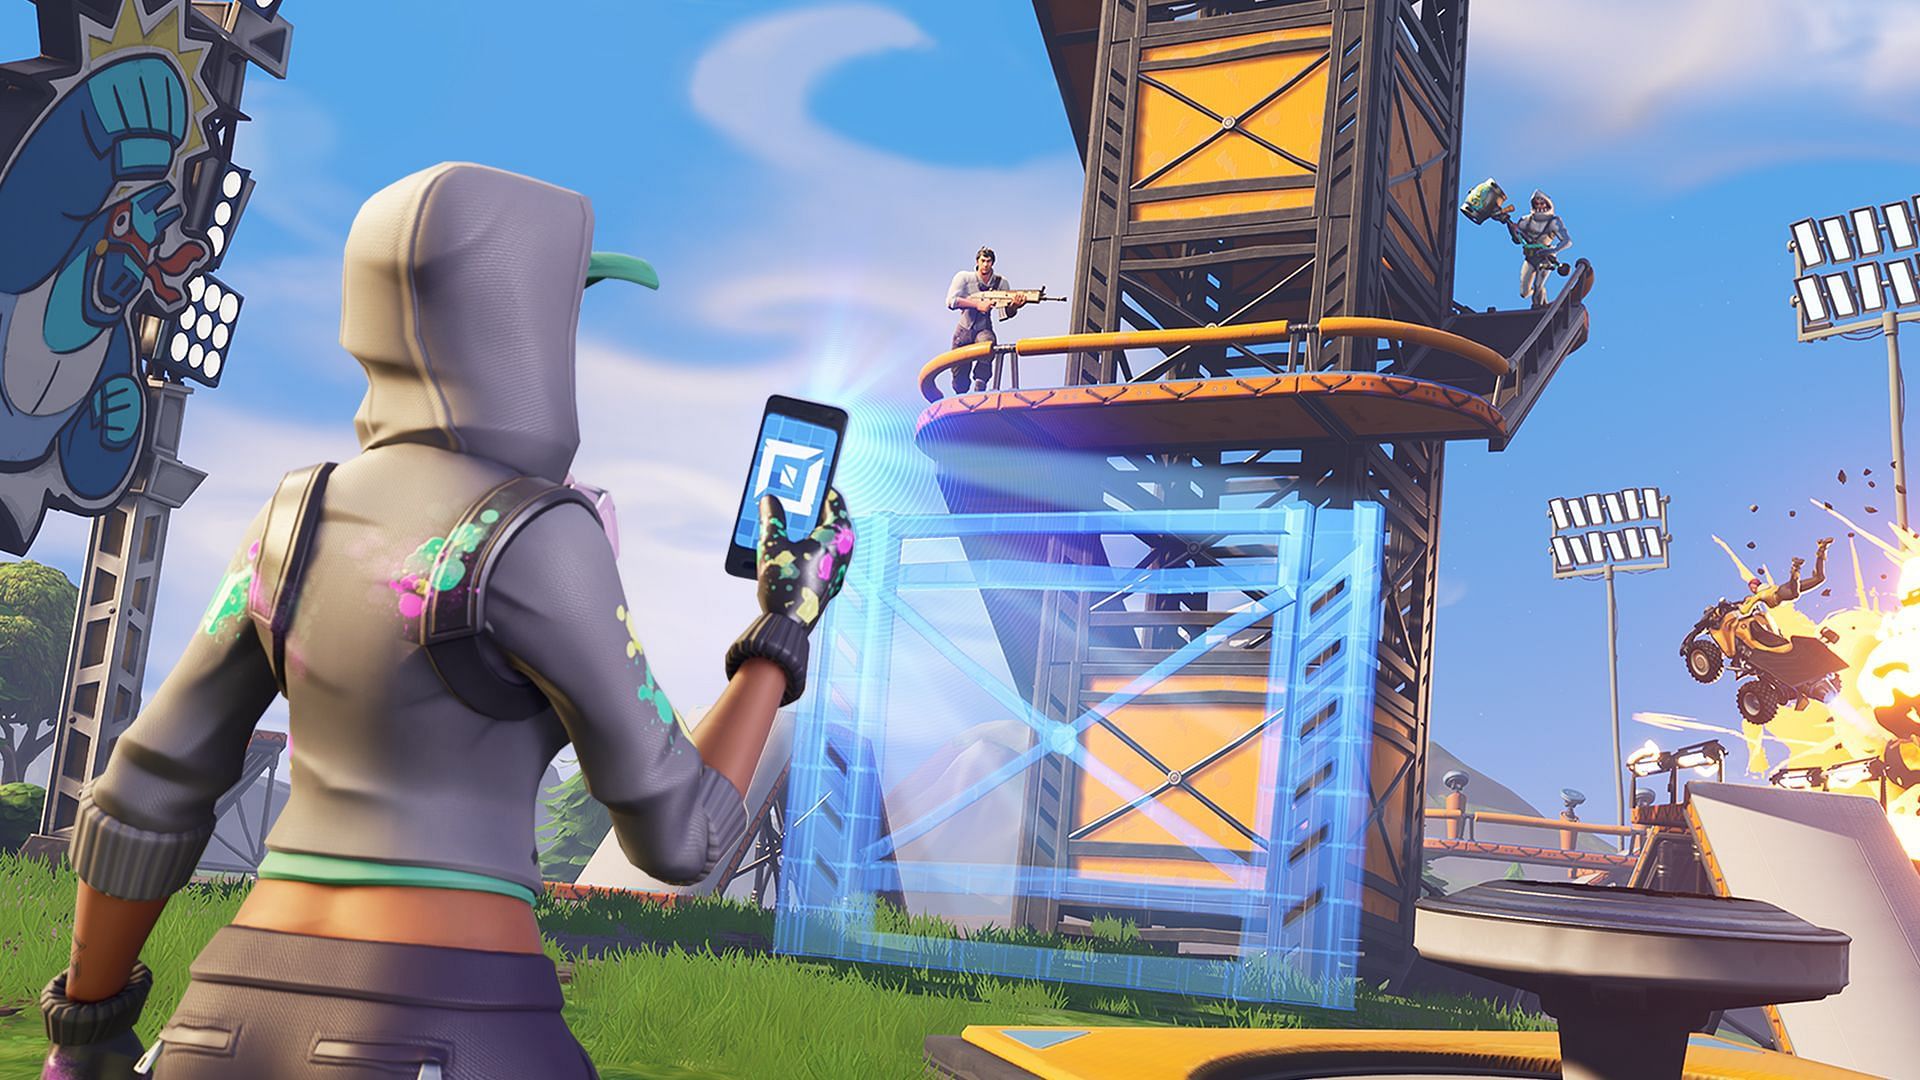 Fortnite Creative Mode has received a few changes recently after the v19.20 update and XP farming has gotten easier (Image via Epic Games)